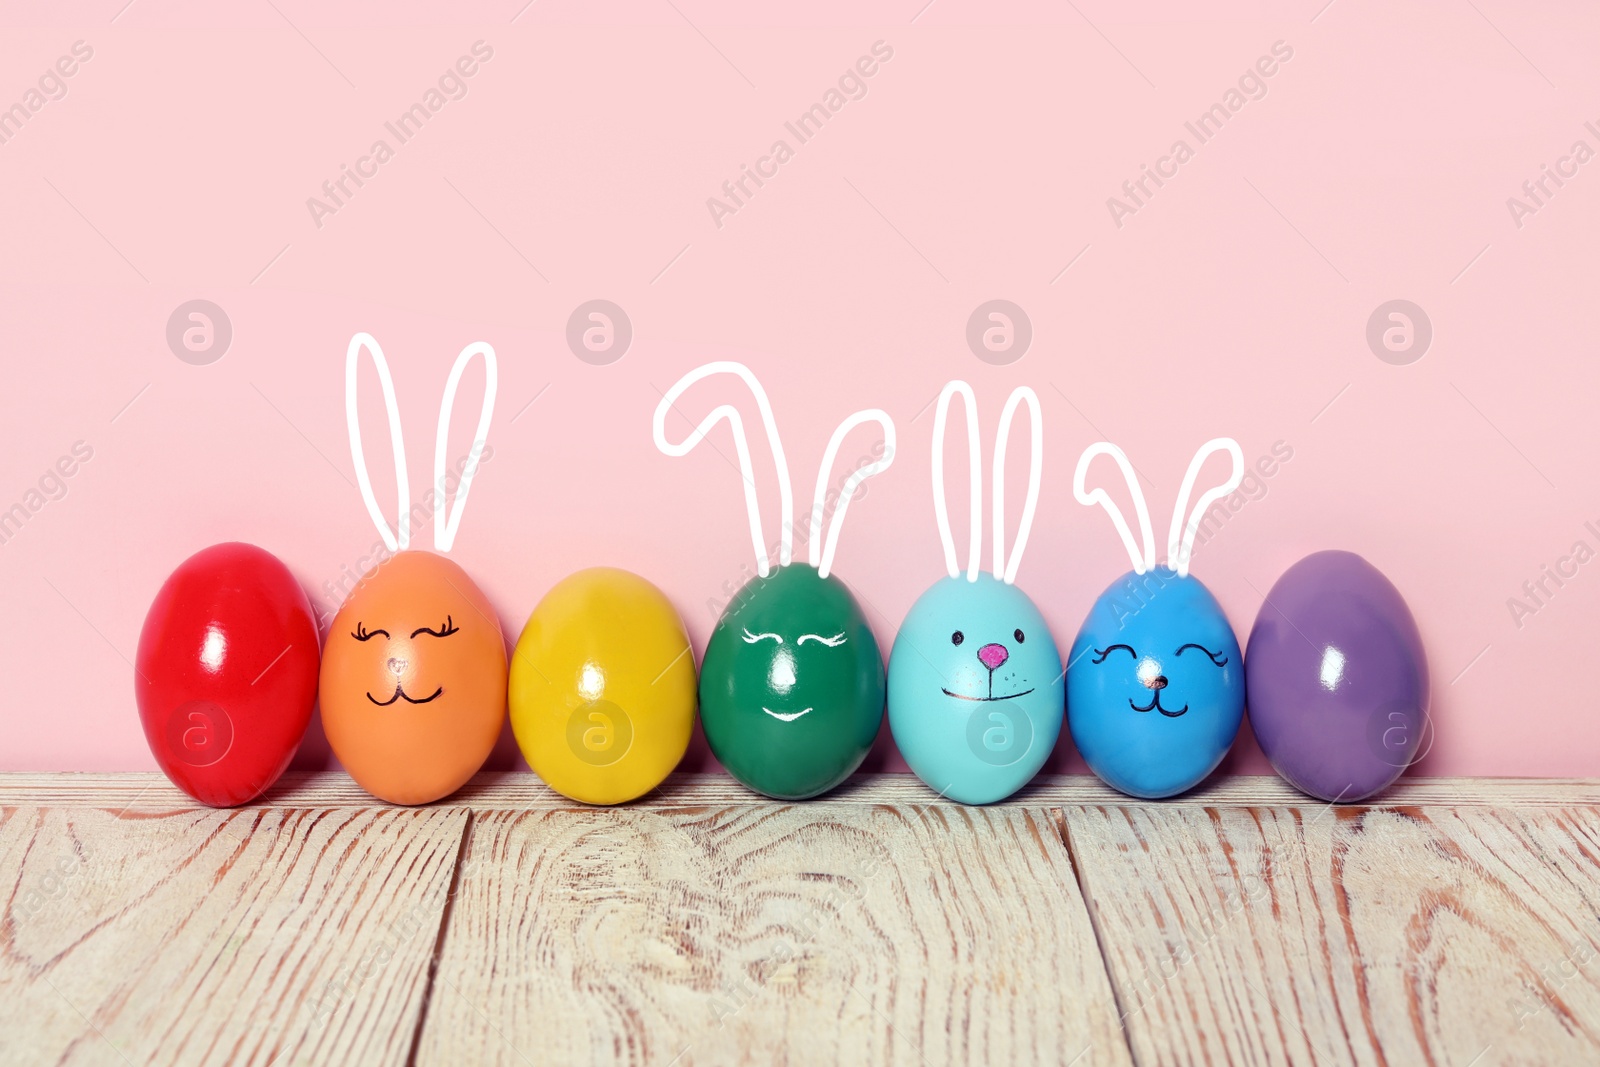 Image of Several eggs with drawn faces and ears as Easter bunnies among others on white wooden table against pink background